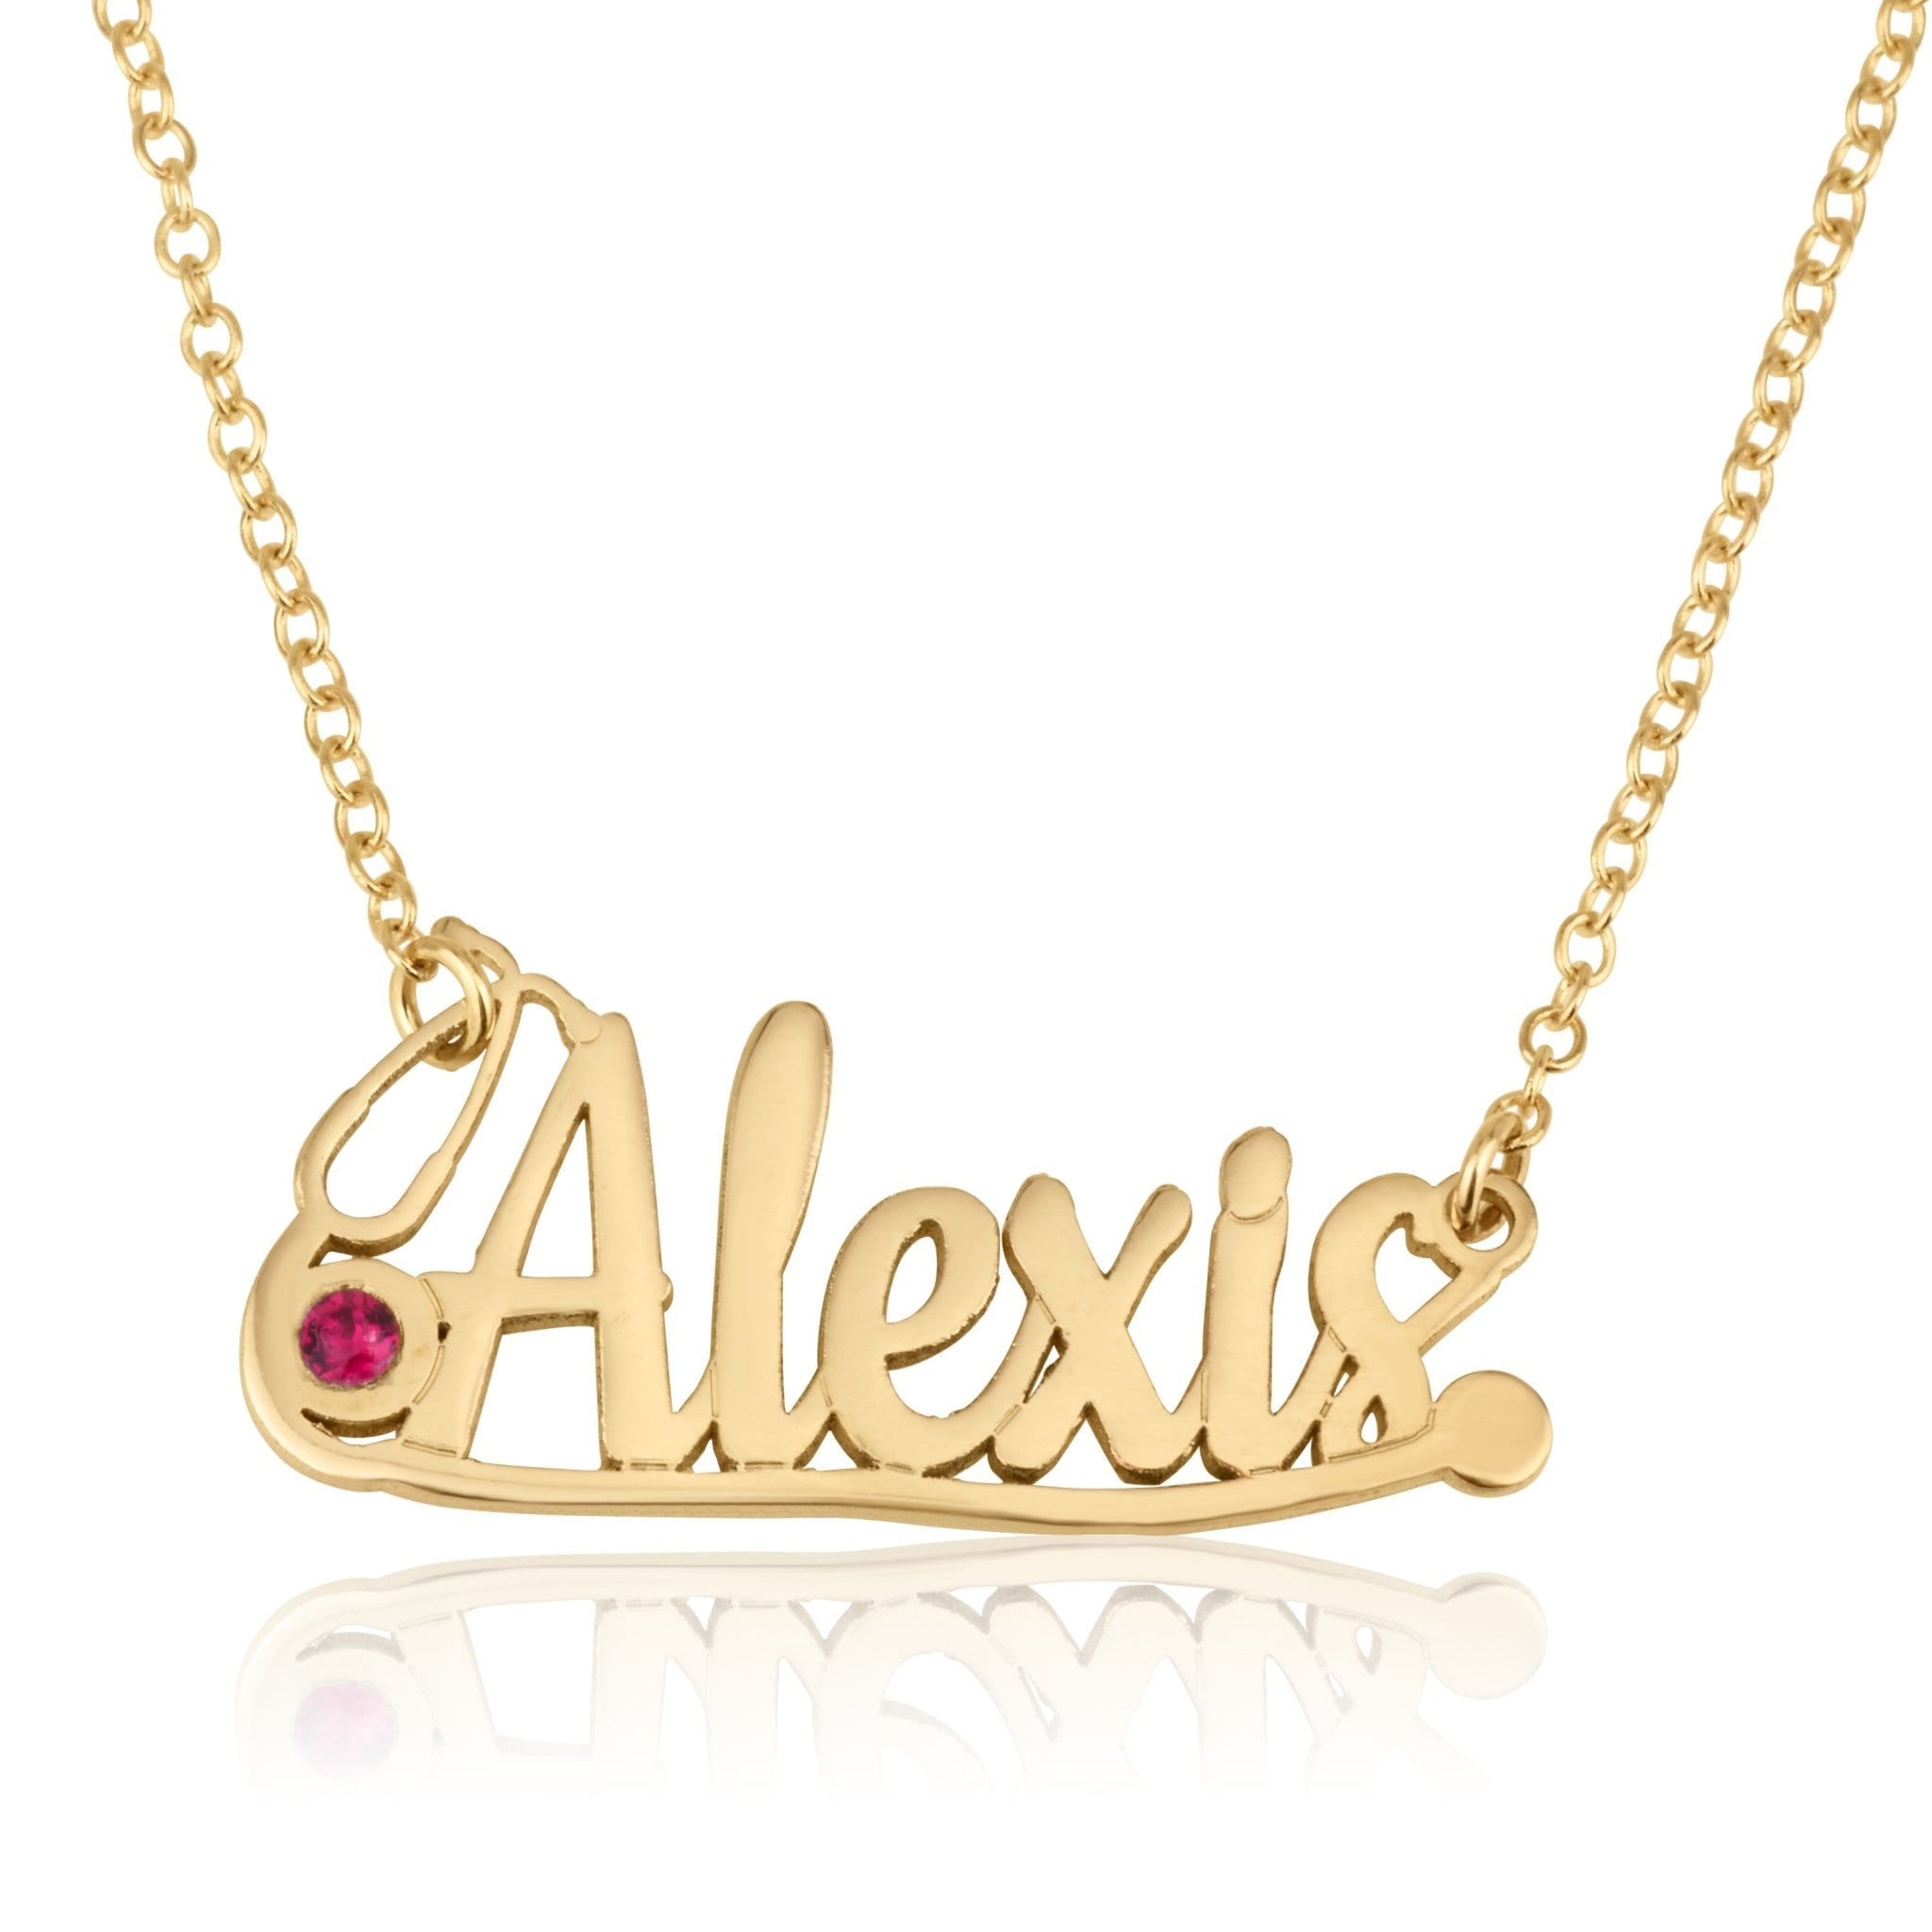 Doctor Stethoscope Necklace With Name And Birthstone - Beleco Jewelry